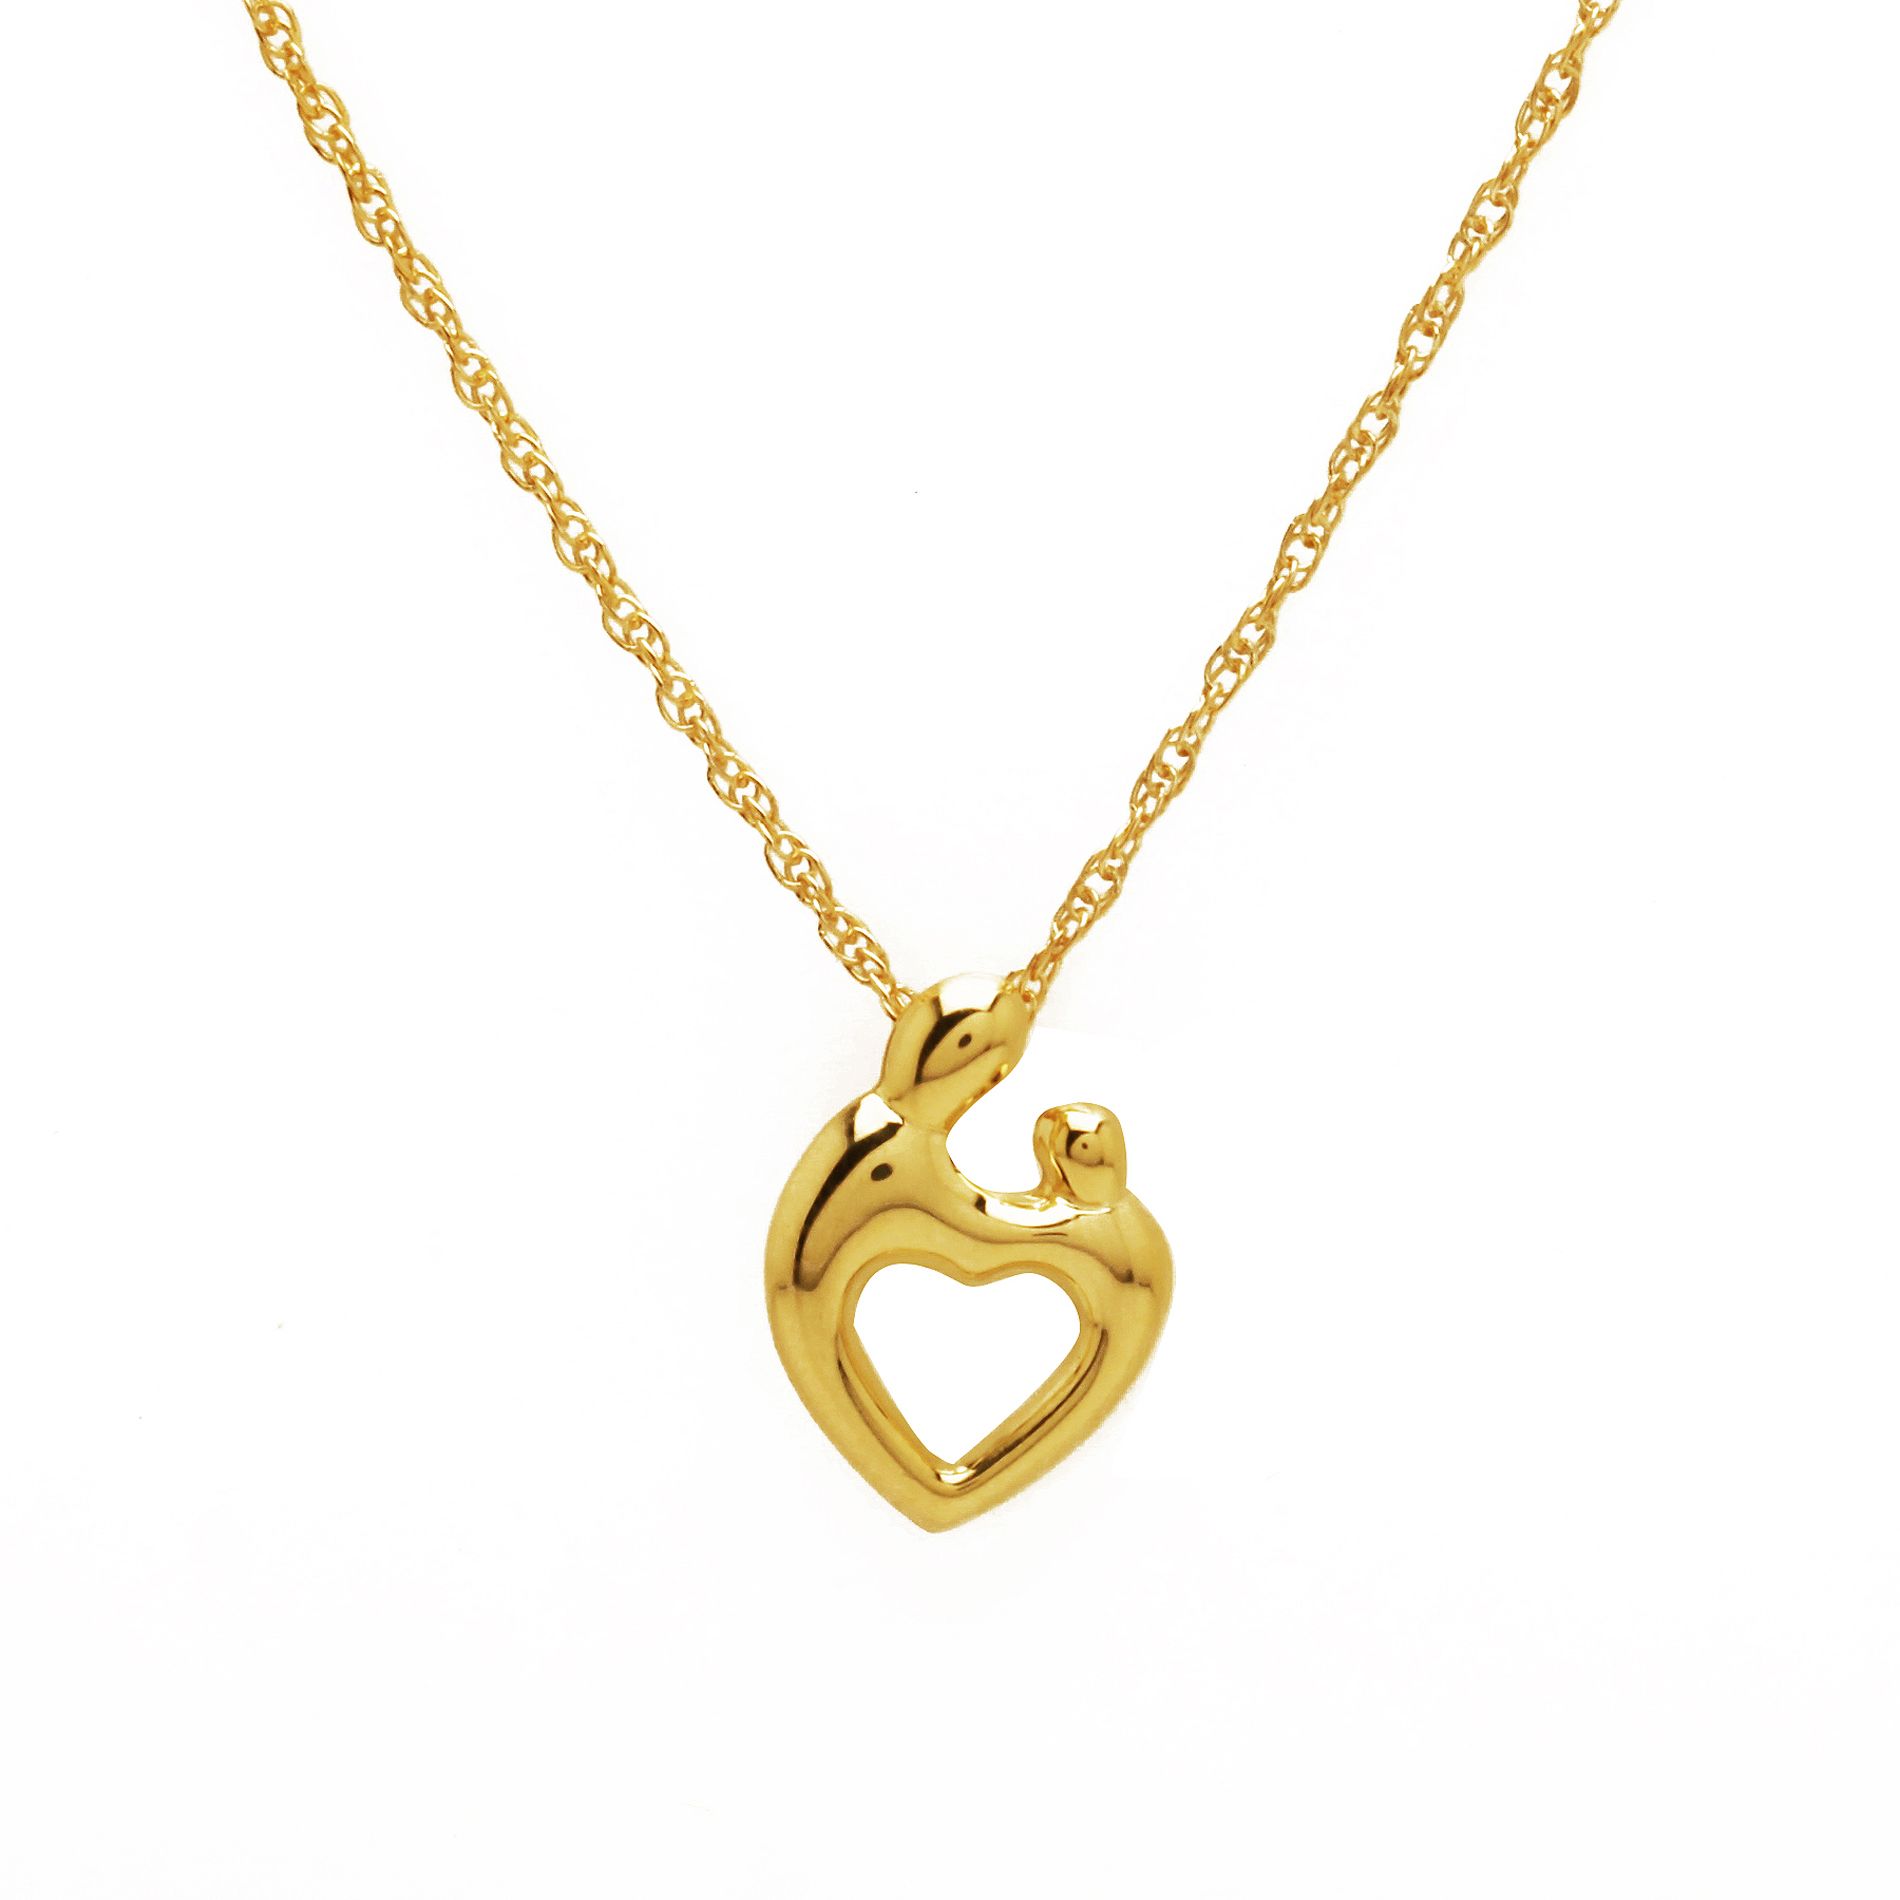 Mother and Child Heart Pendant in 10K Gold - Jewelry - Pendants & Necklaces